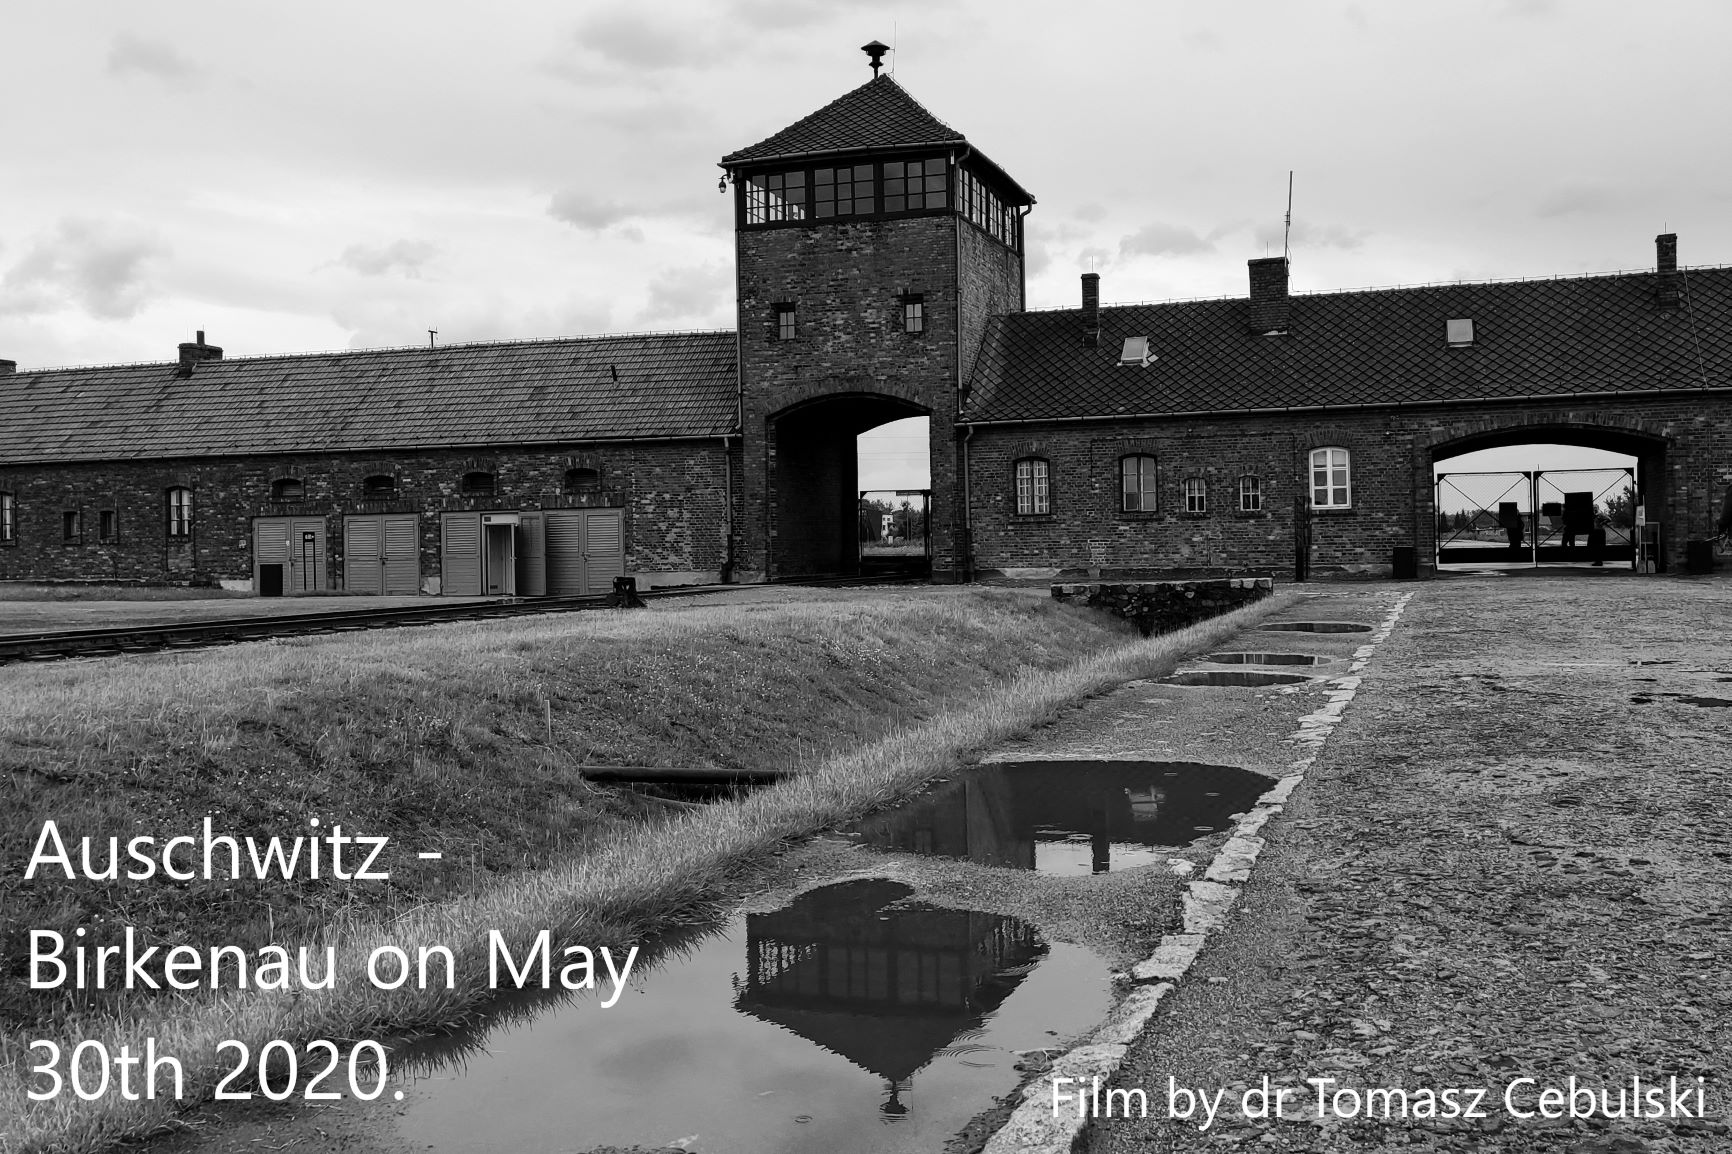 Auschwitz-Birkenau Museum opened for two days to test the new health protection protocol.